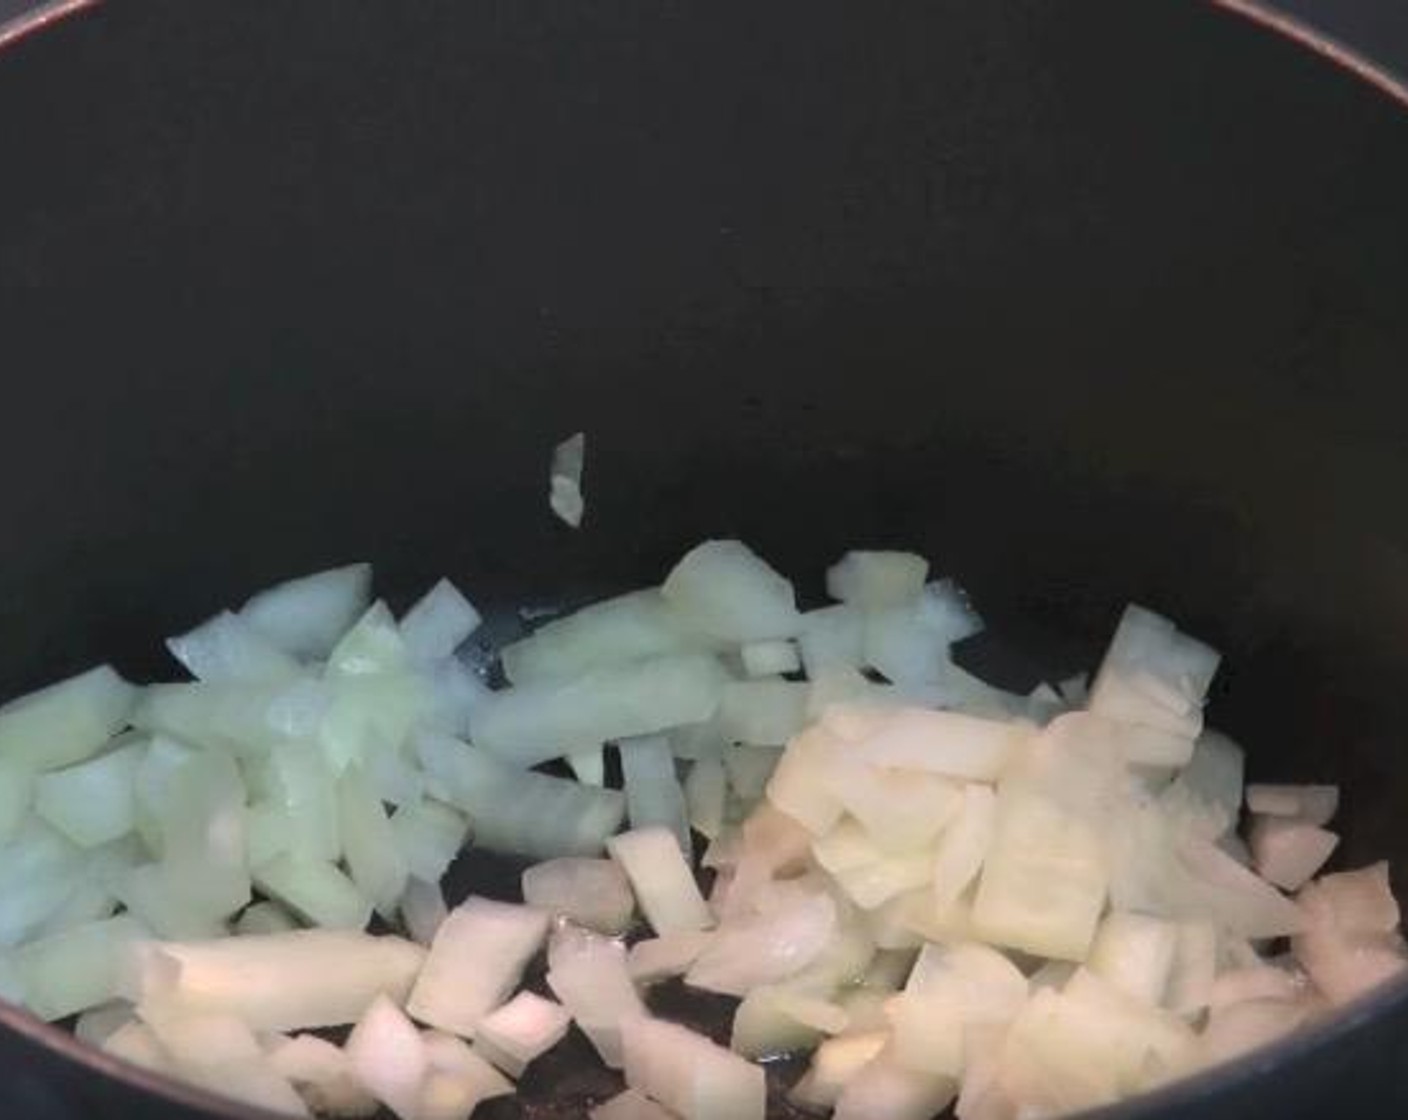 step 1 In a saucepan, add Olive Oil (1 Tbsp) and Yellow Onion (1). Cook over a medium-high heat for 2-3 minutes, or until the onions have softened.